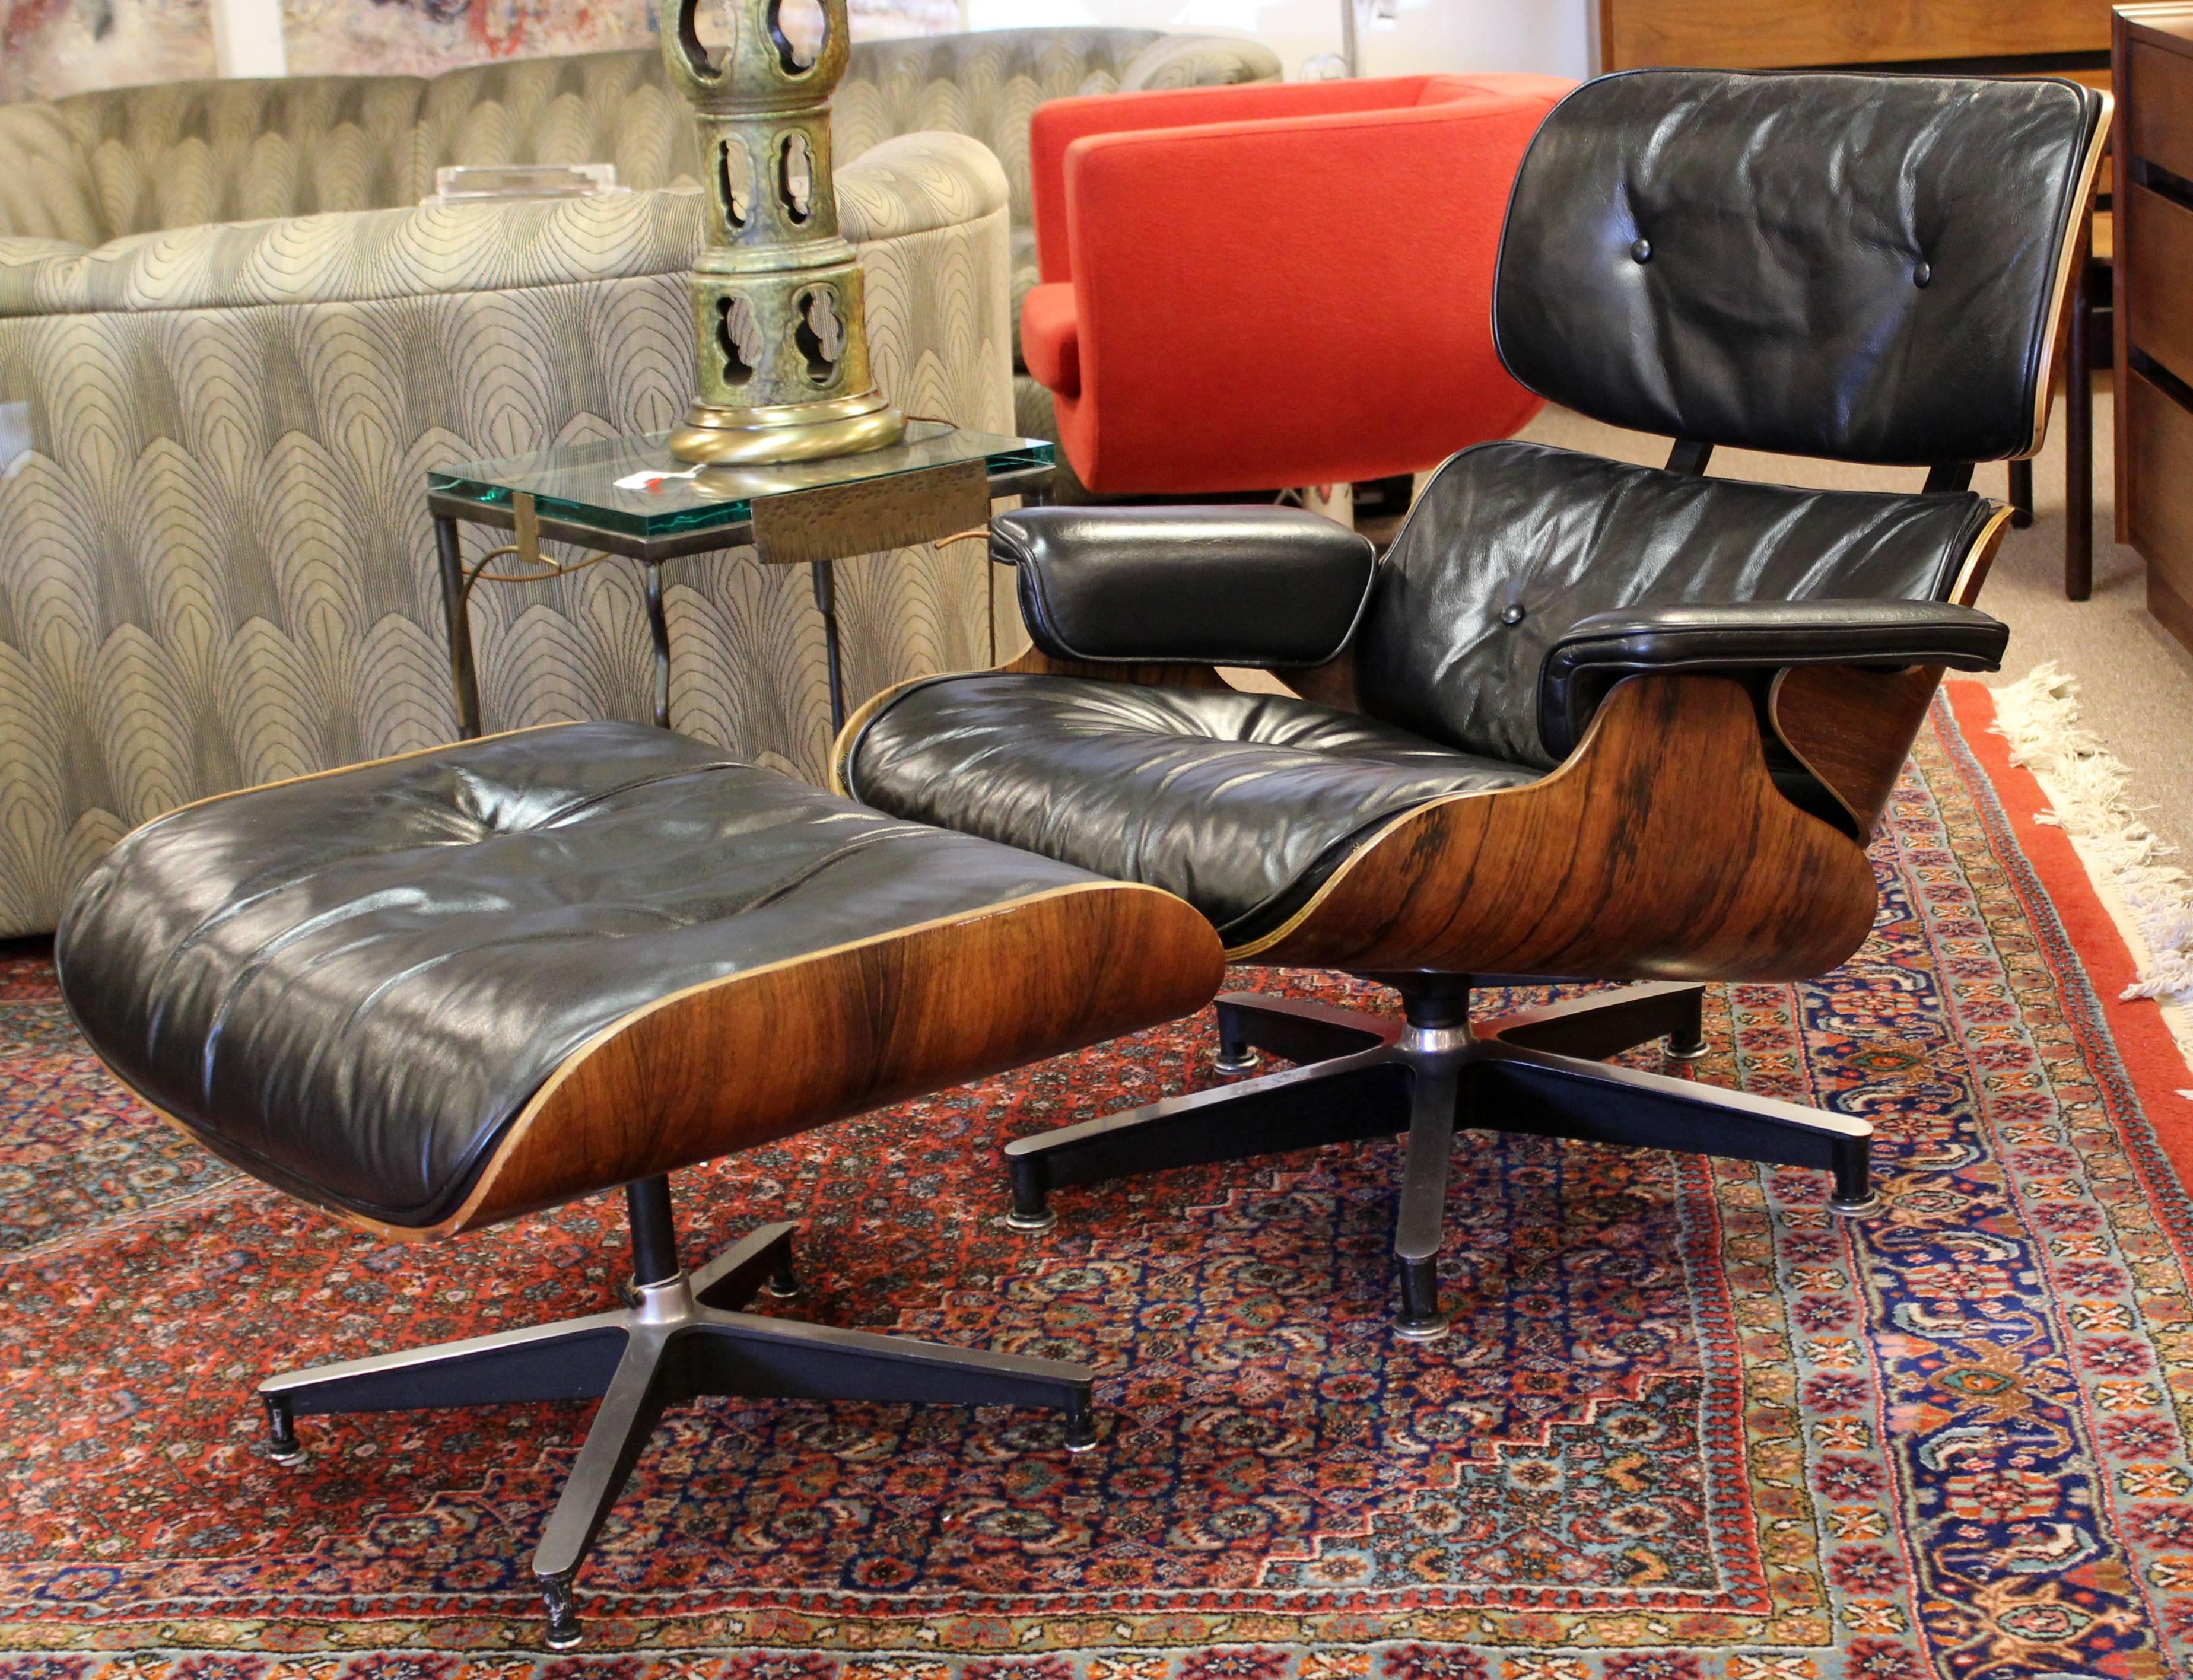 For your consideration are an original, early edition, rosewood lounge chair and ottoman, with black leather upholstery, by Charles & Ray Eames for Herman Miller, circa the 1950s. In excellent condition. The dimensions of the chair are 31.5